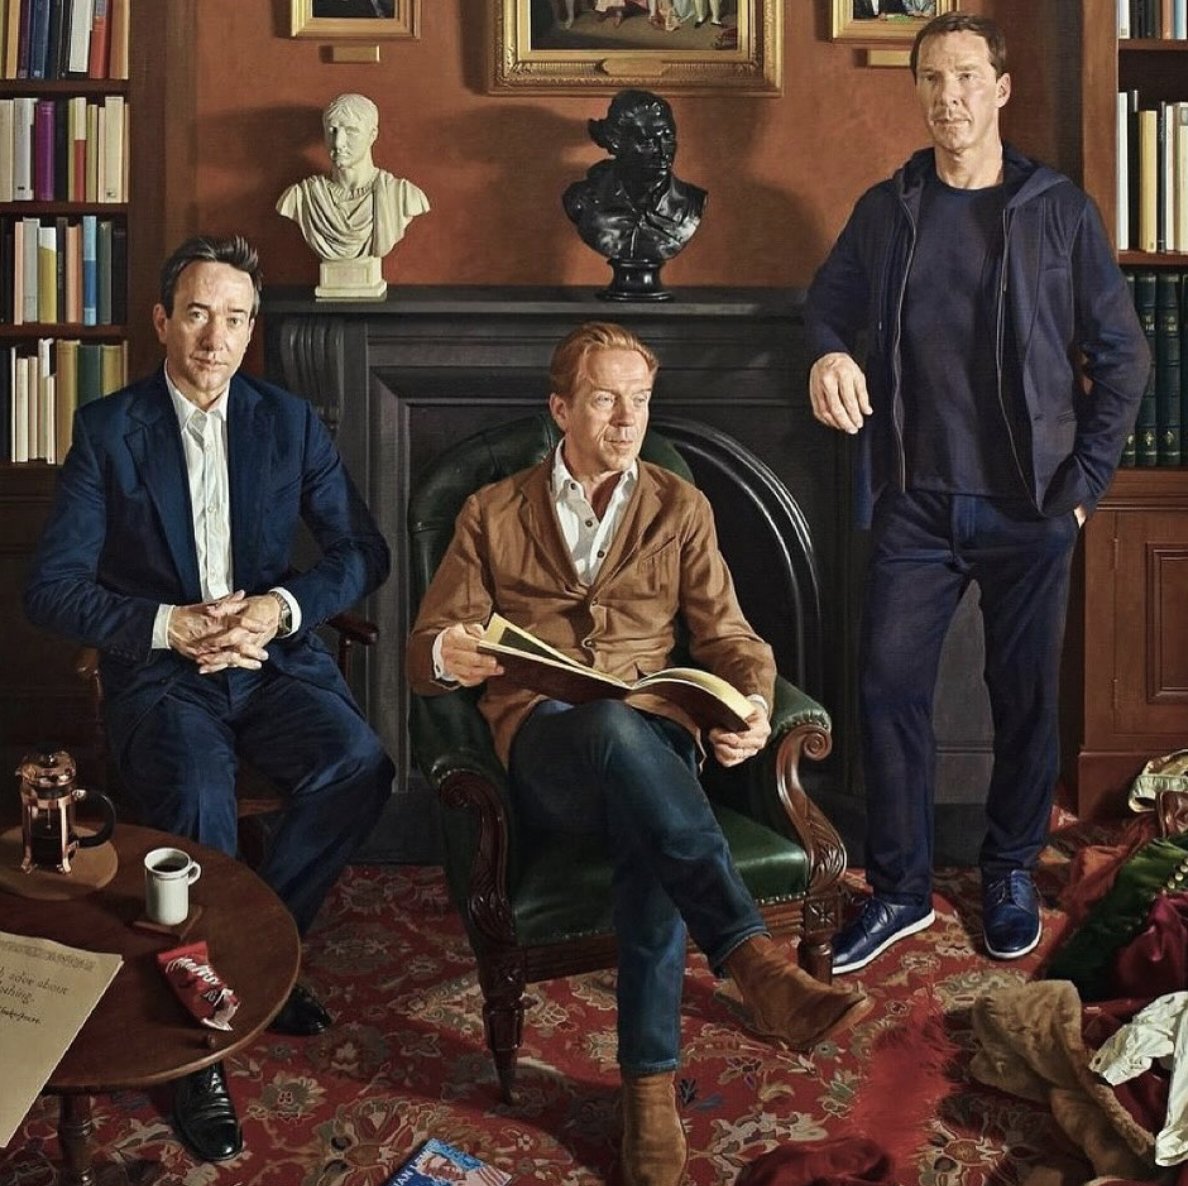 These three in a painting together? Yes, please! 👏🏻 Get the story behind Benjamin Sullivan's fantastic painting: damian-lewis.com/?p=53621 #DamianLewis #MatthewMacfadyen #BenedictCumberbatch #BenjaminSullivan